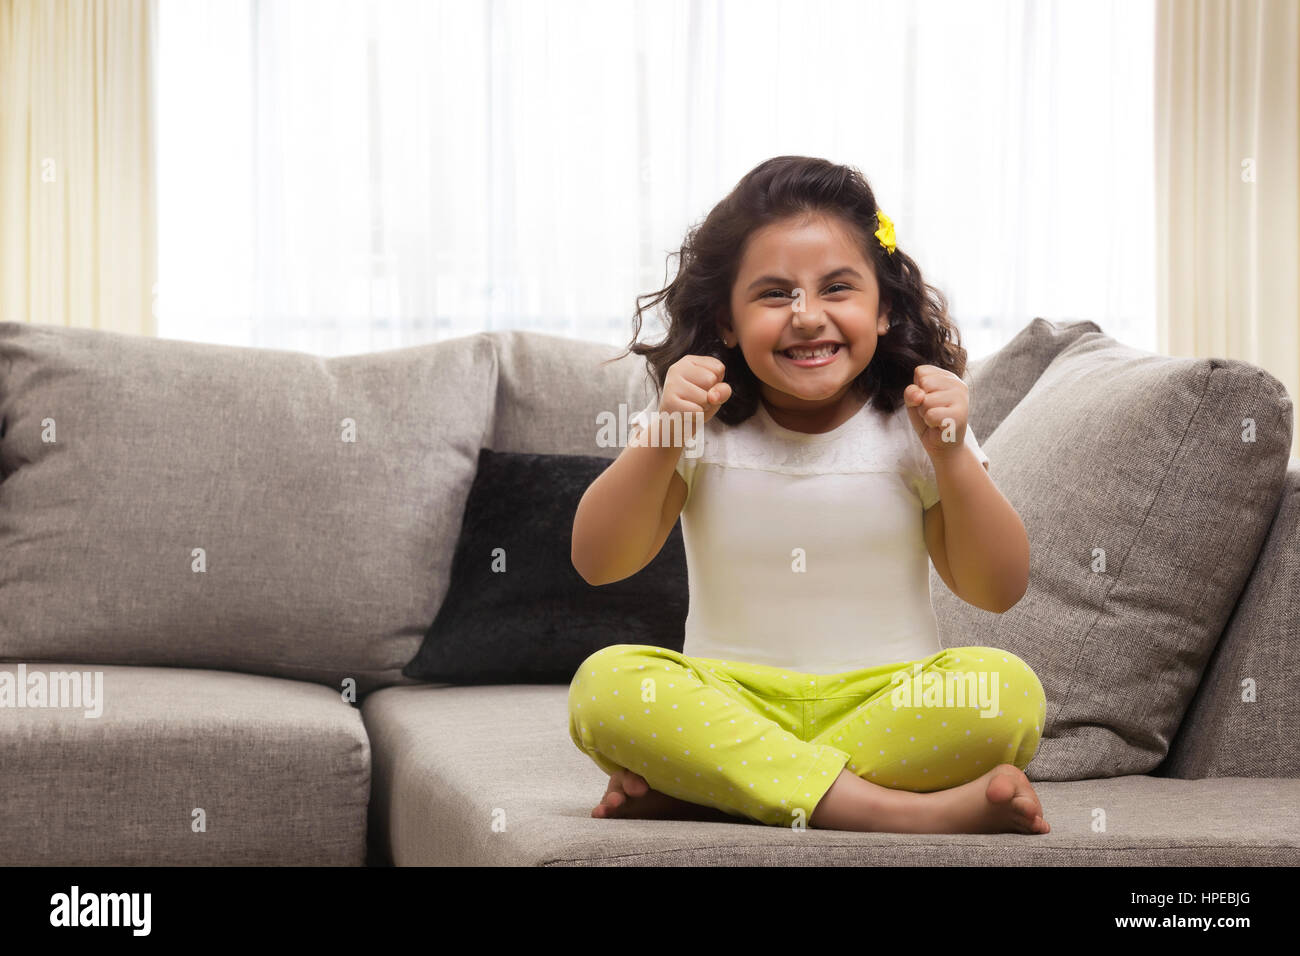 Cheerful young girl holding her fists up Stock Photo